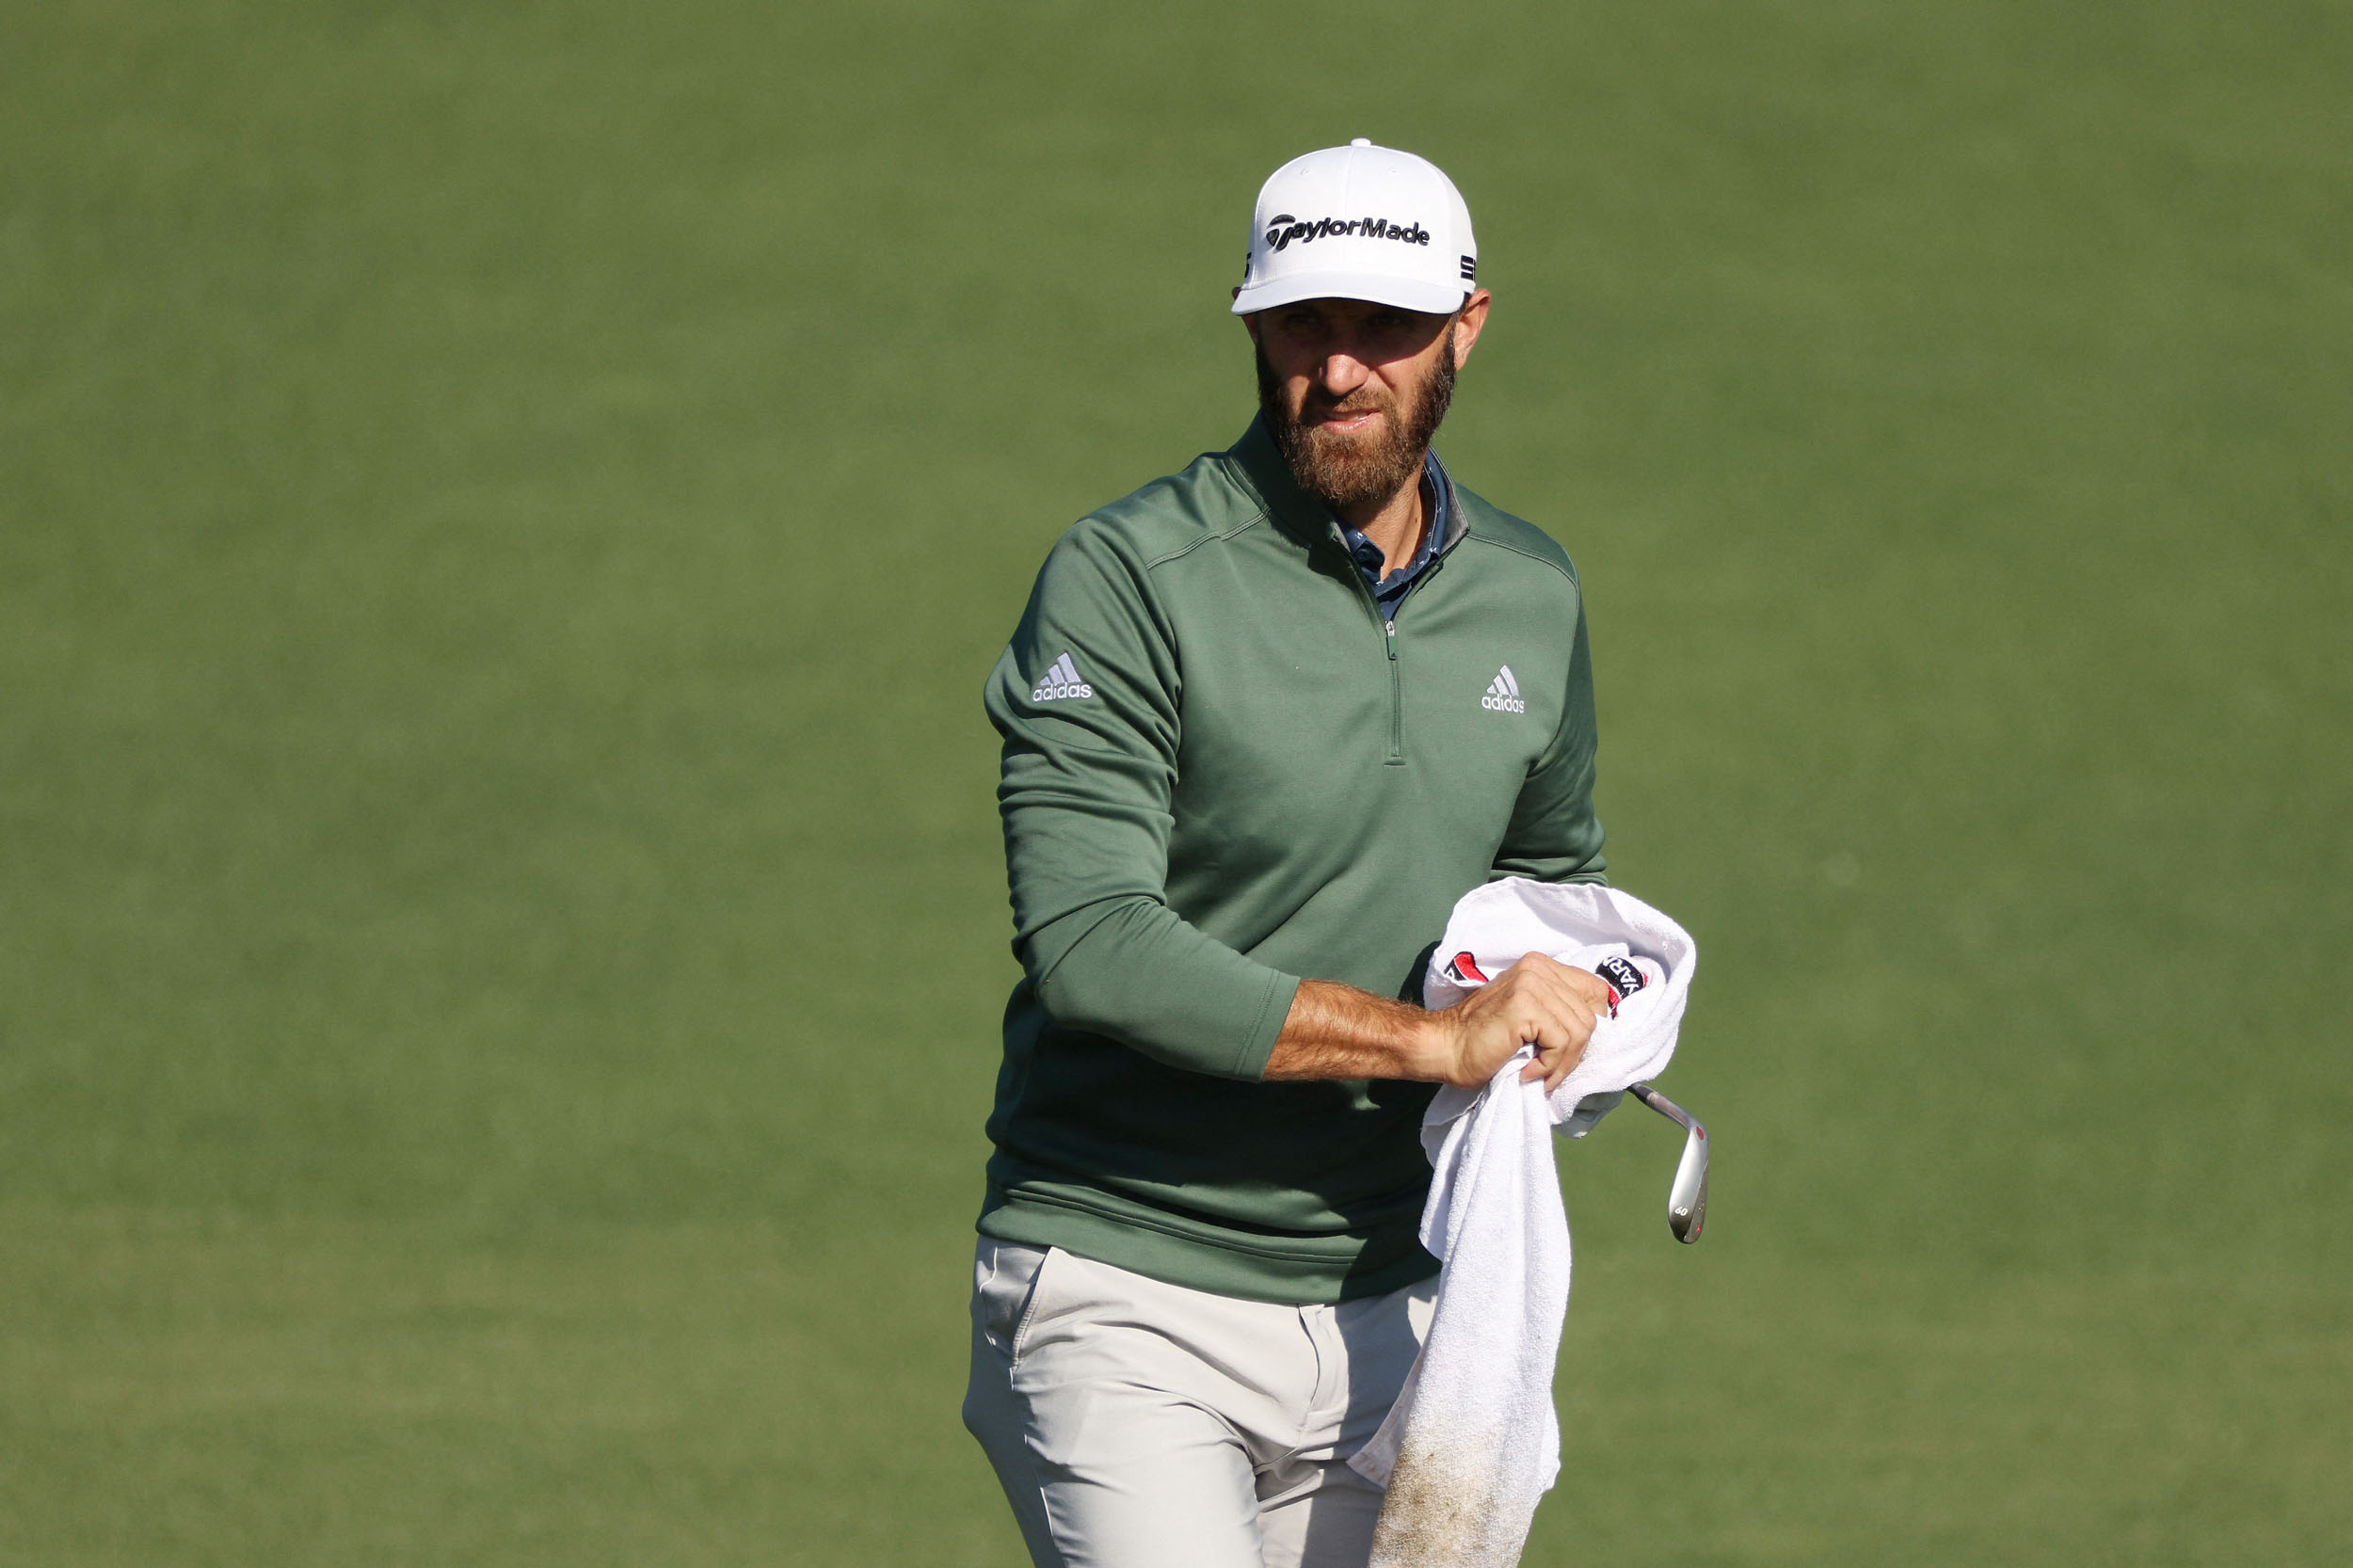 AUGUSTA, GEORGIA - APRIL 05: Dustin Johnson of the United States looks on from the second hole during a practice round prior to the Masters at Augusta National Golf Club on April 05, 2021 in Augusta, Georgia. Kevin C. Cox/Getty Images/AFP (Photo by Kevin C. Cox / GETTY IMAGES NORTH AMERICA / Getty Images via AFP)